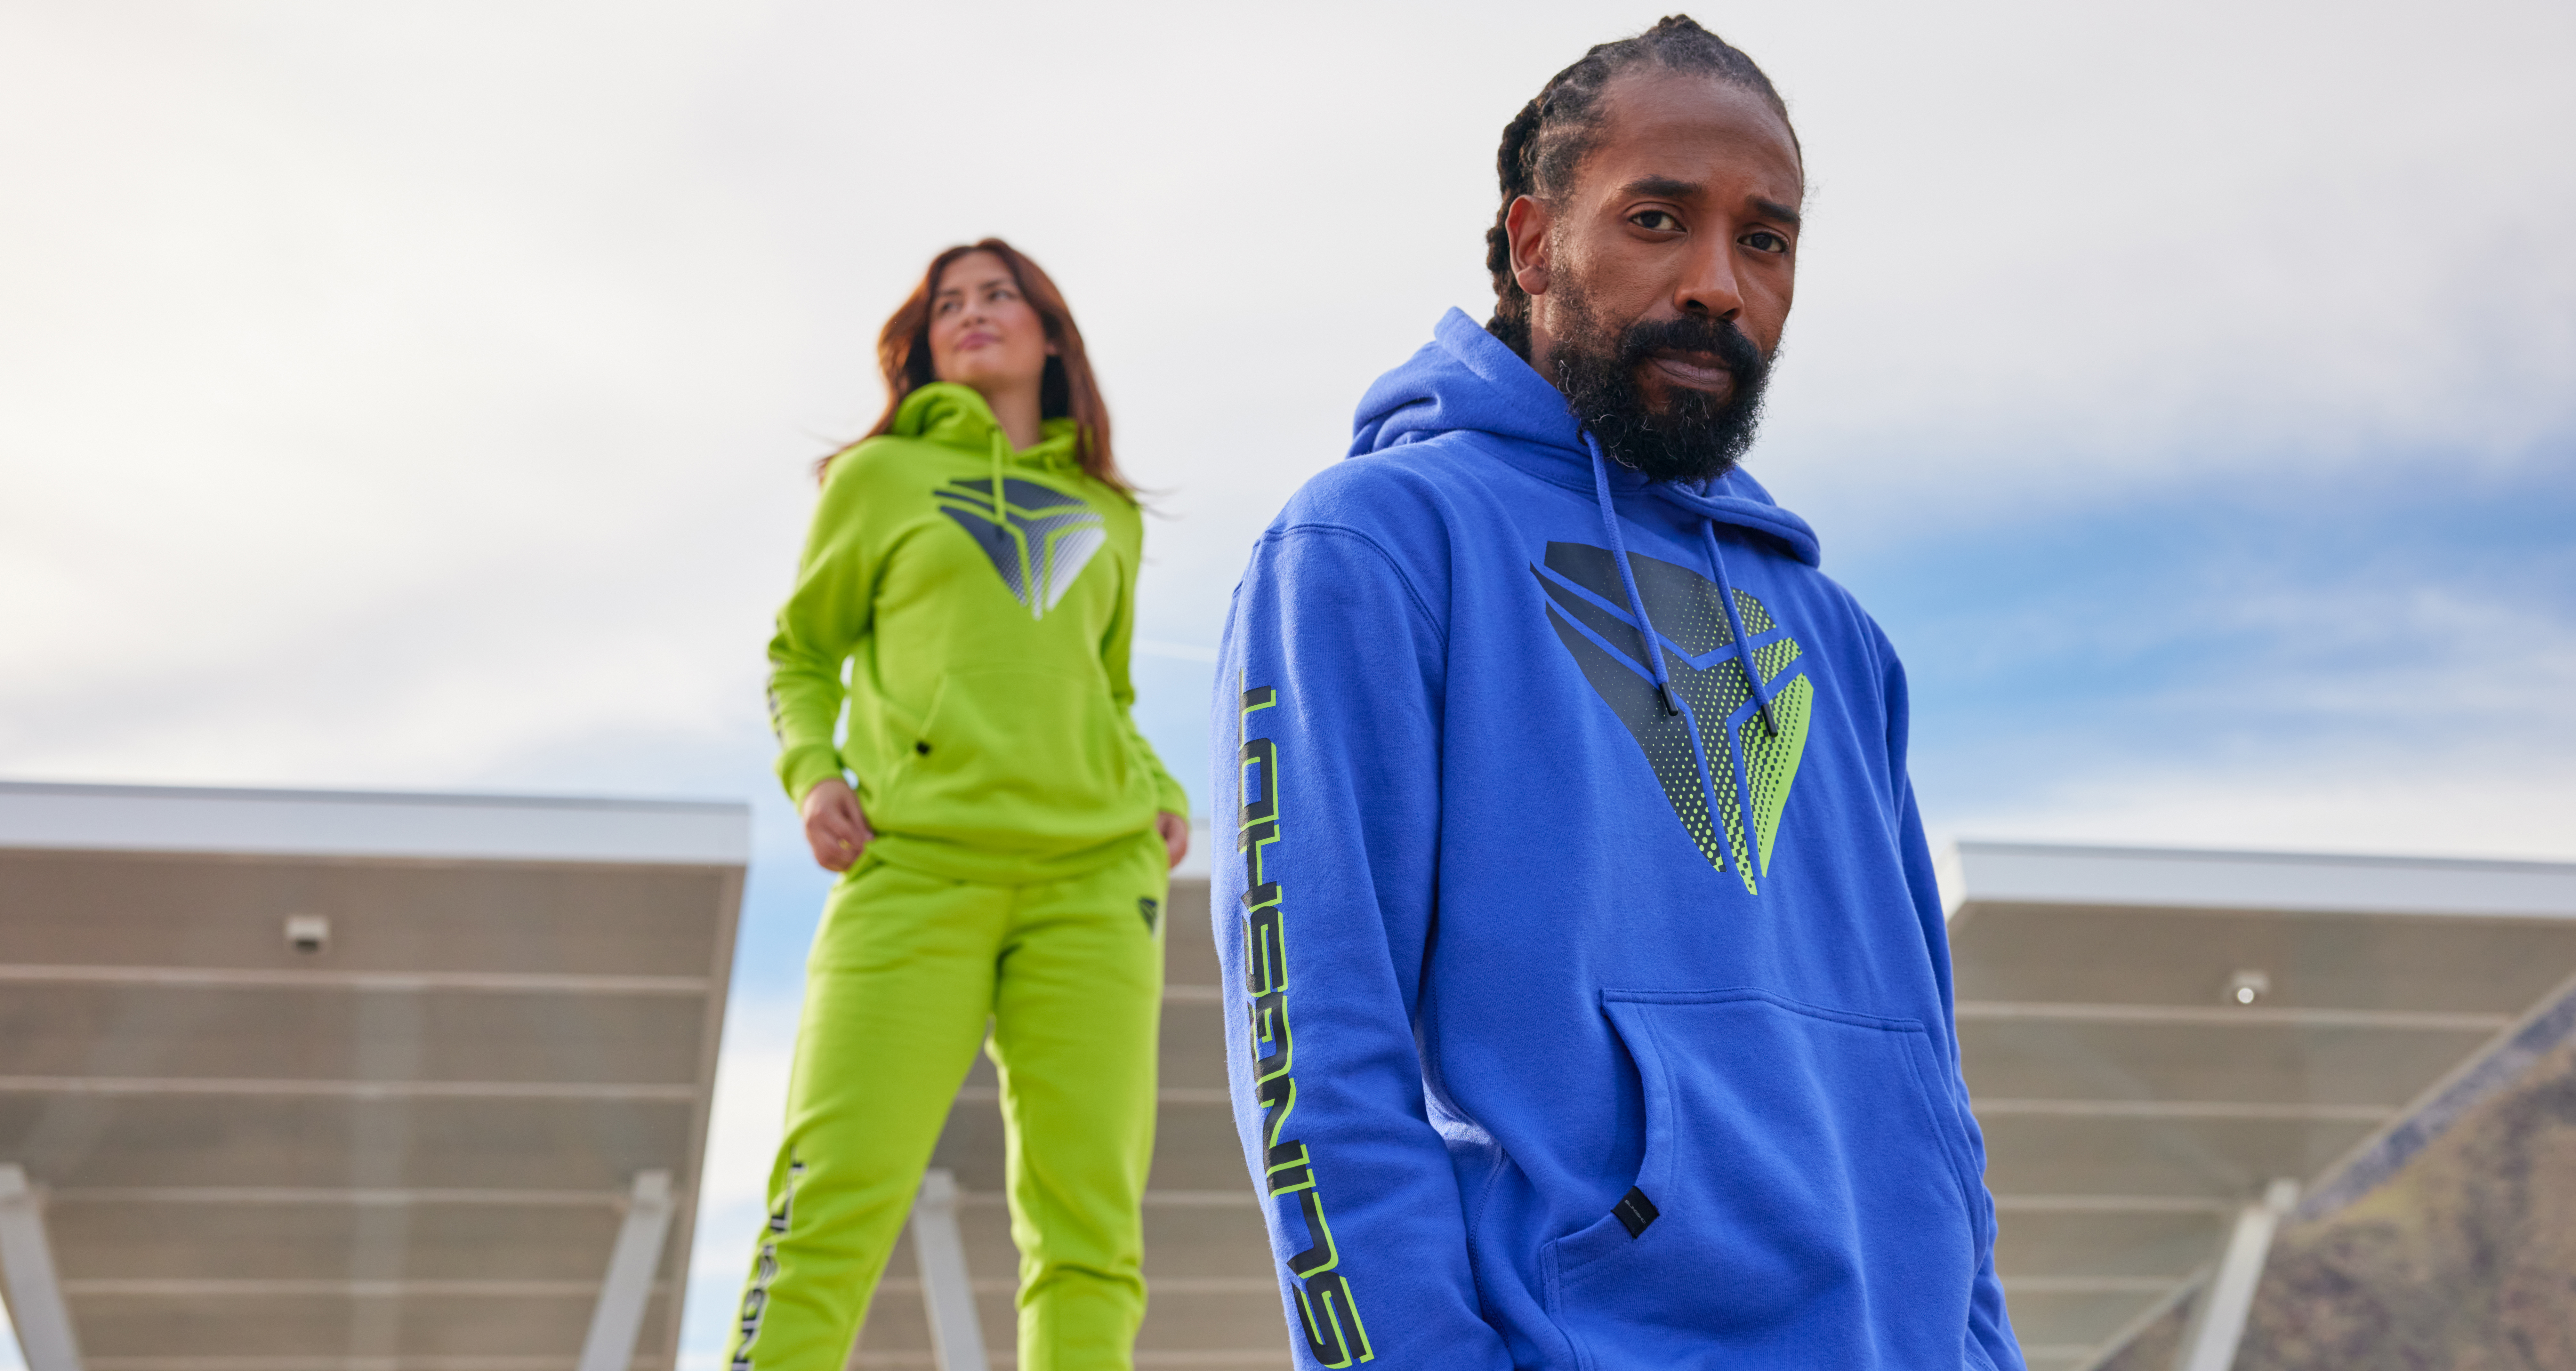 Polaris Slingshot bold and colorful 2023 clothing collection